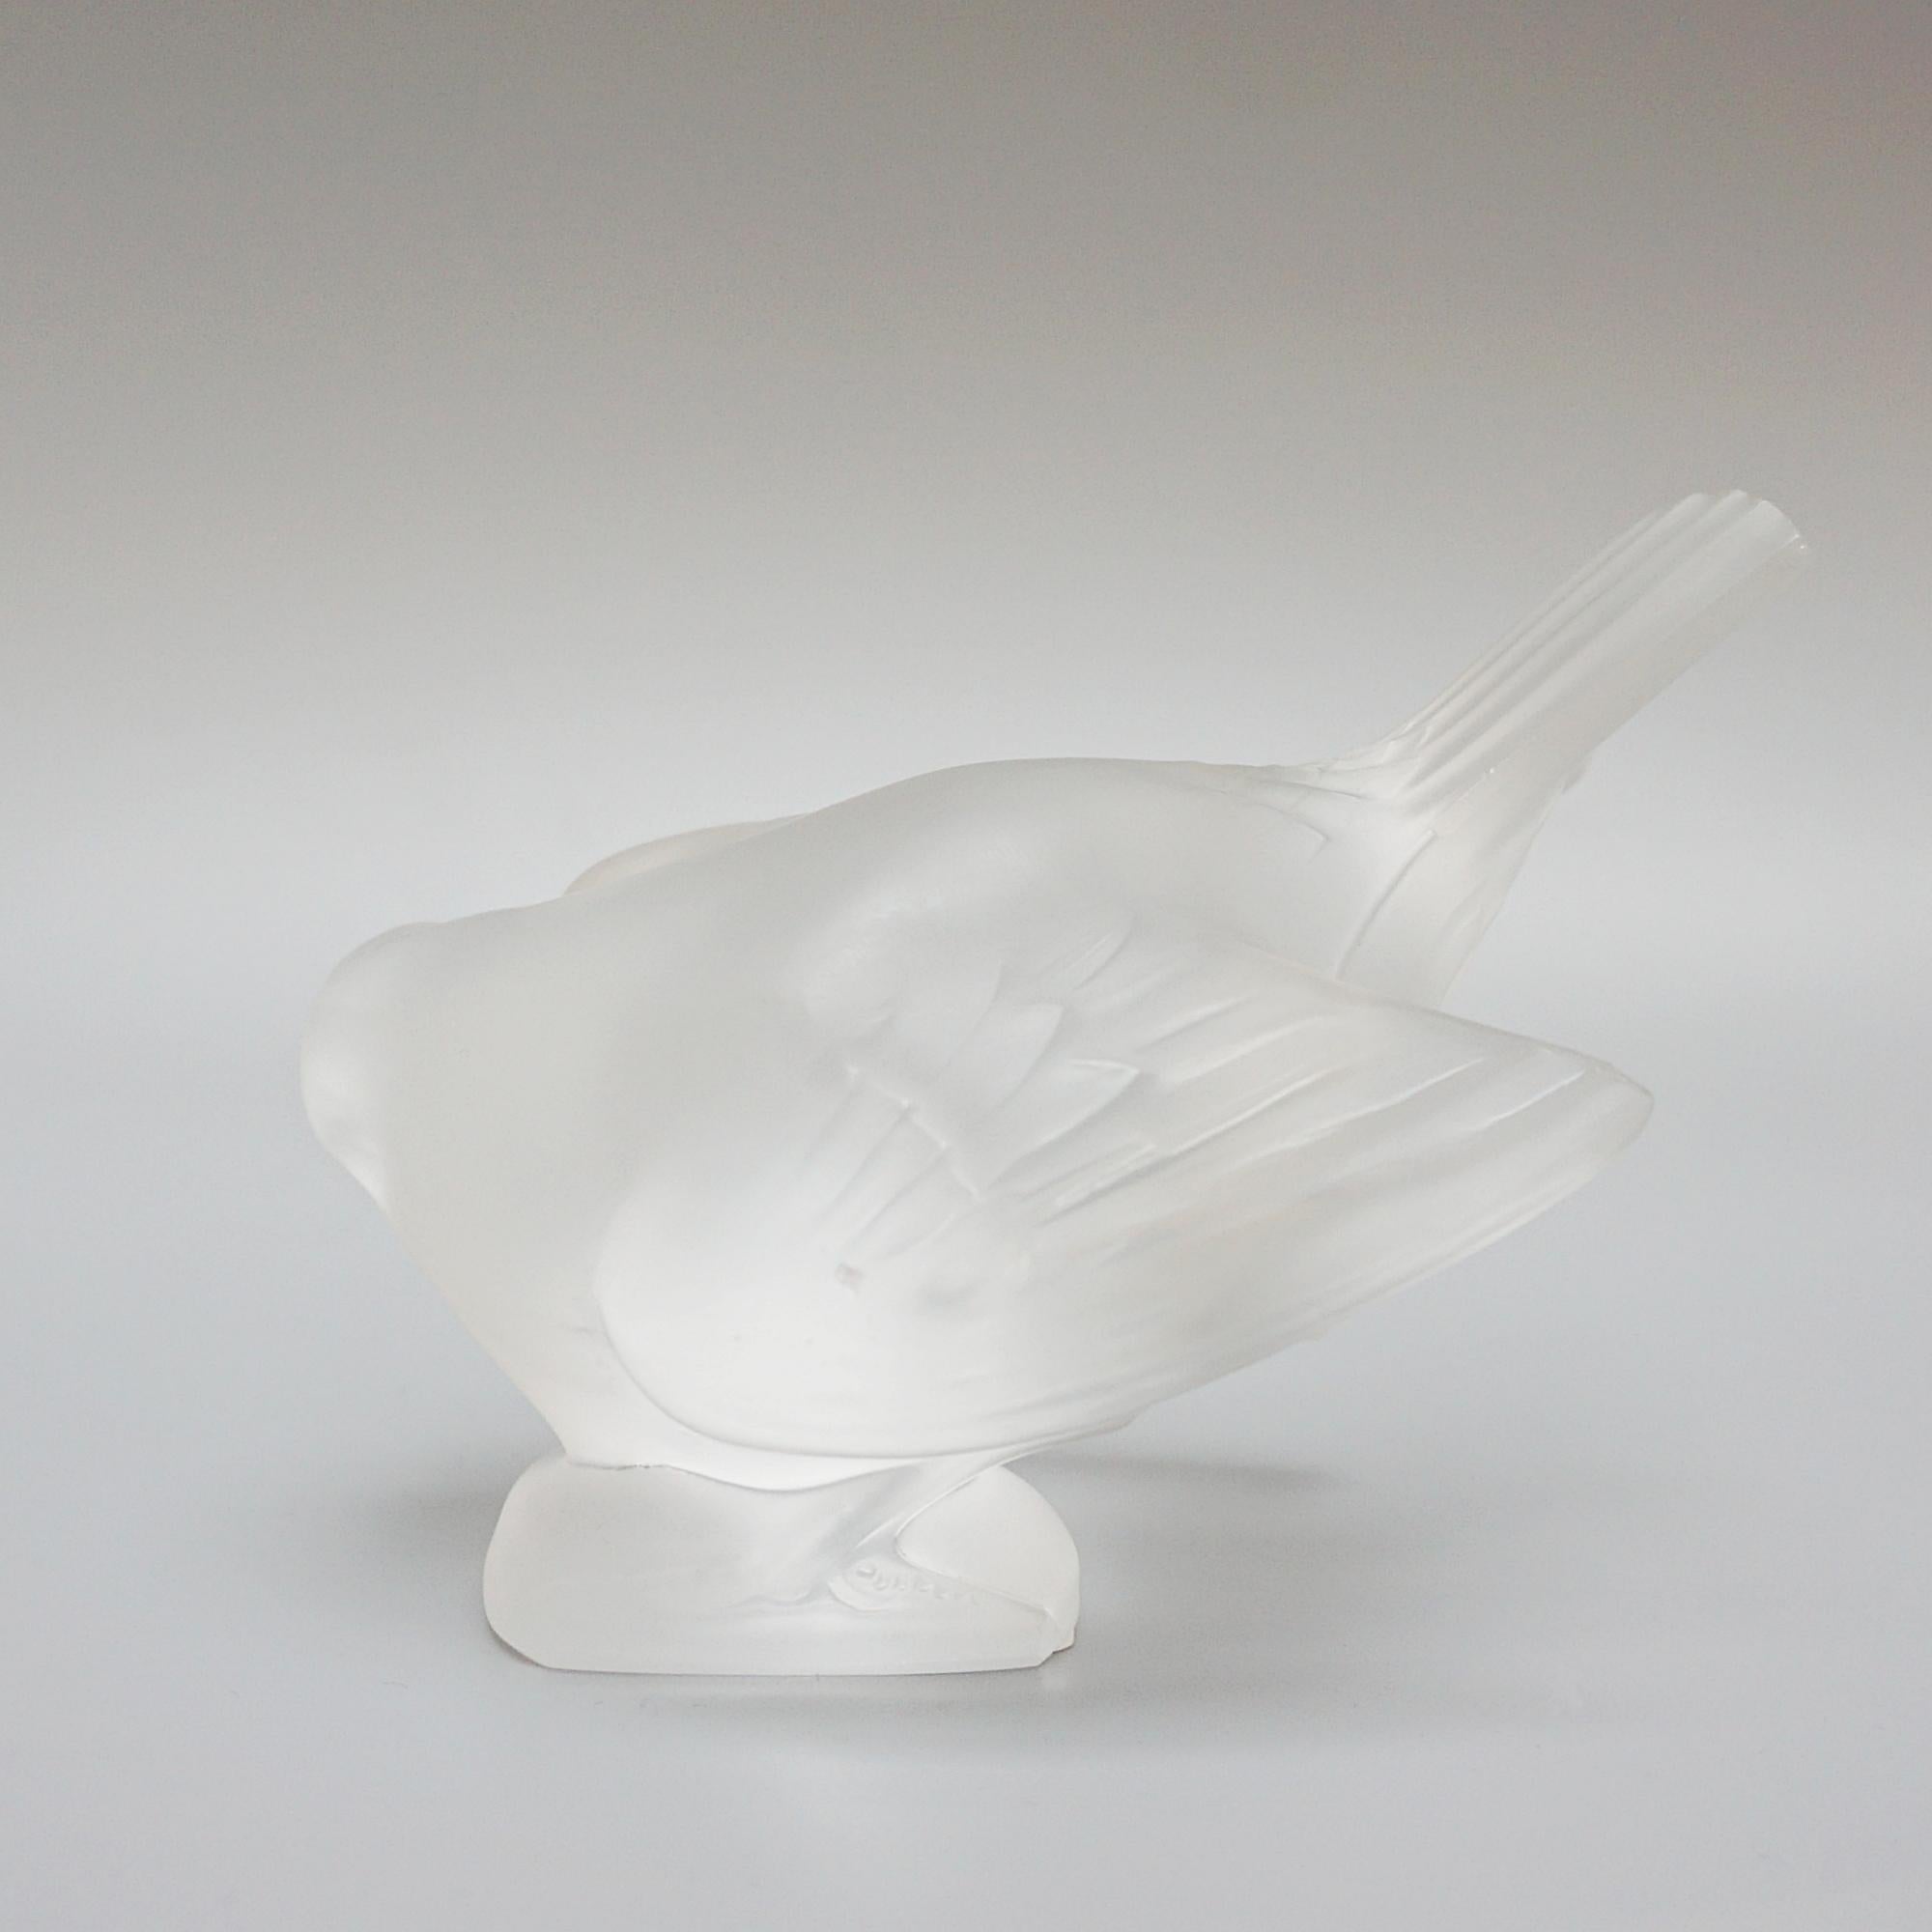 'Moineau Coquet' A Glass Bird Paperweight by Marc Lalique (1900 - 1977) For Sale 1